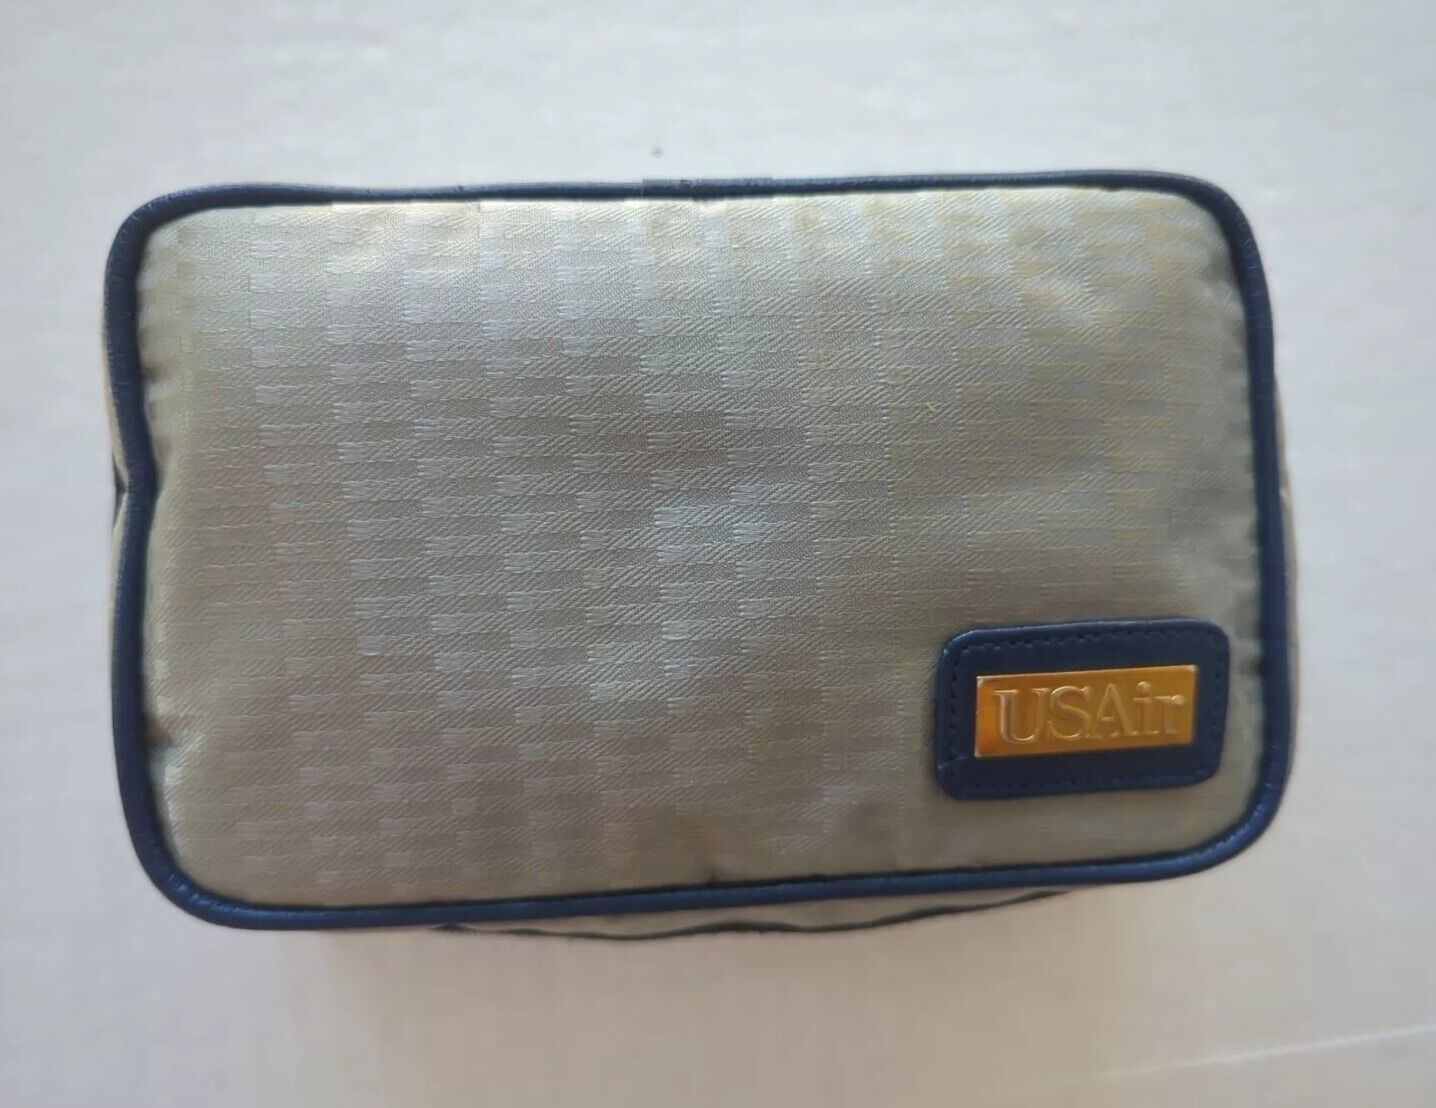 US Air Travel First Class Flights Toiletry Bag and Items Photographed Included